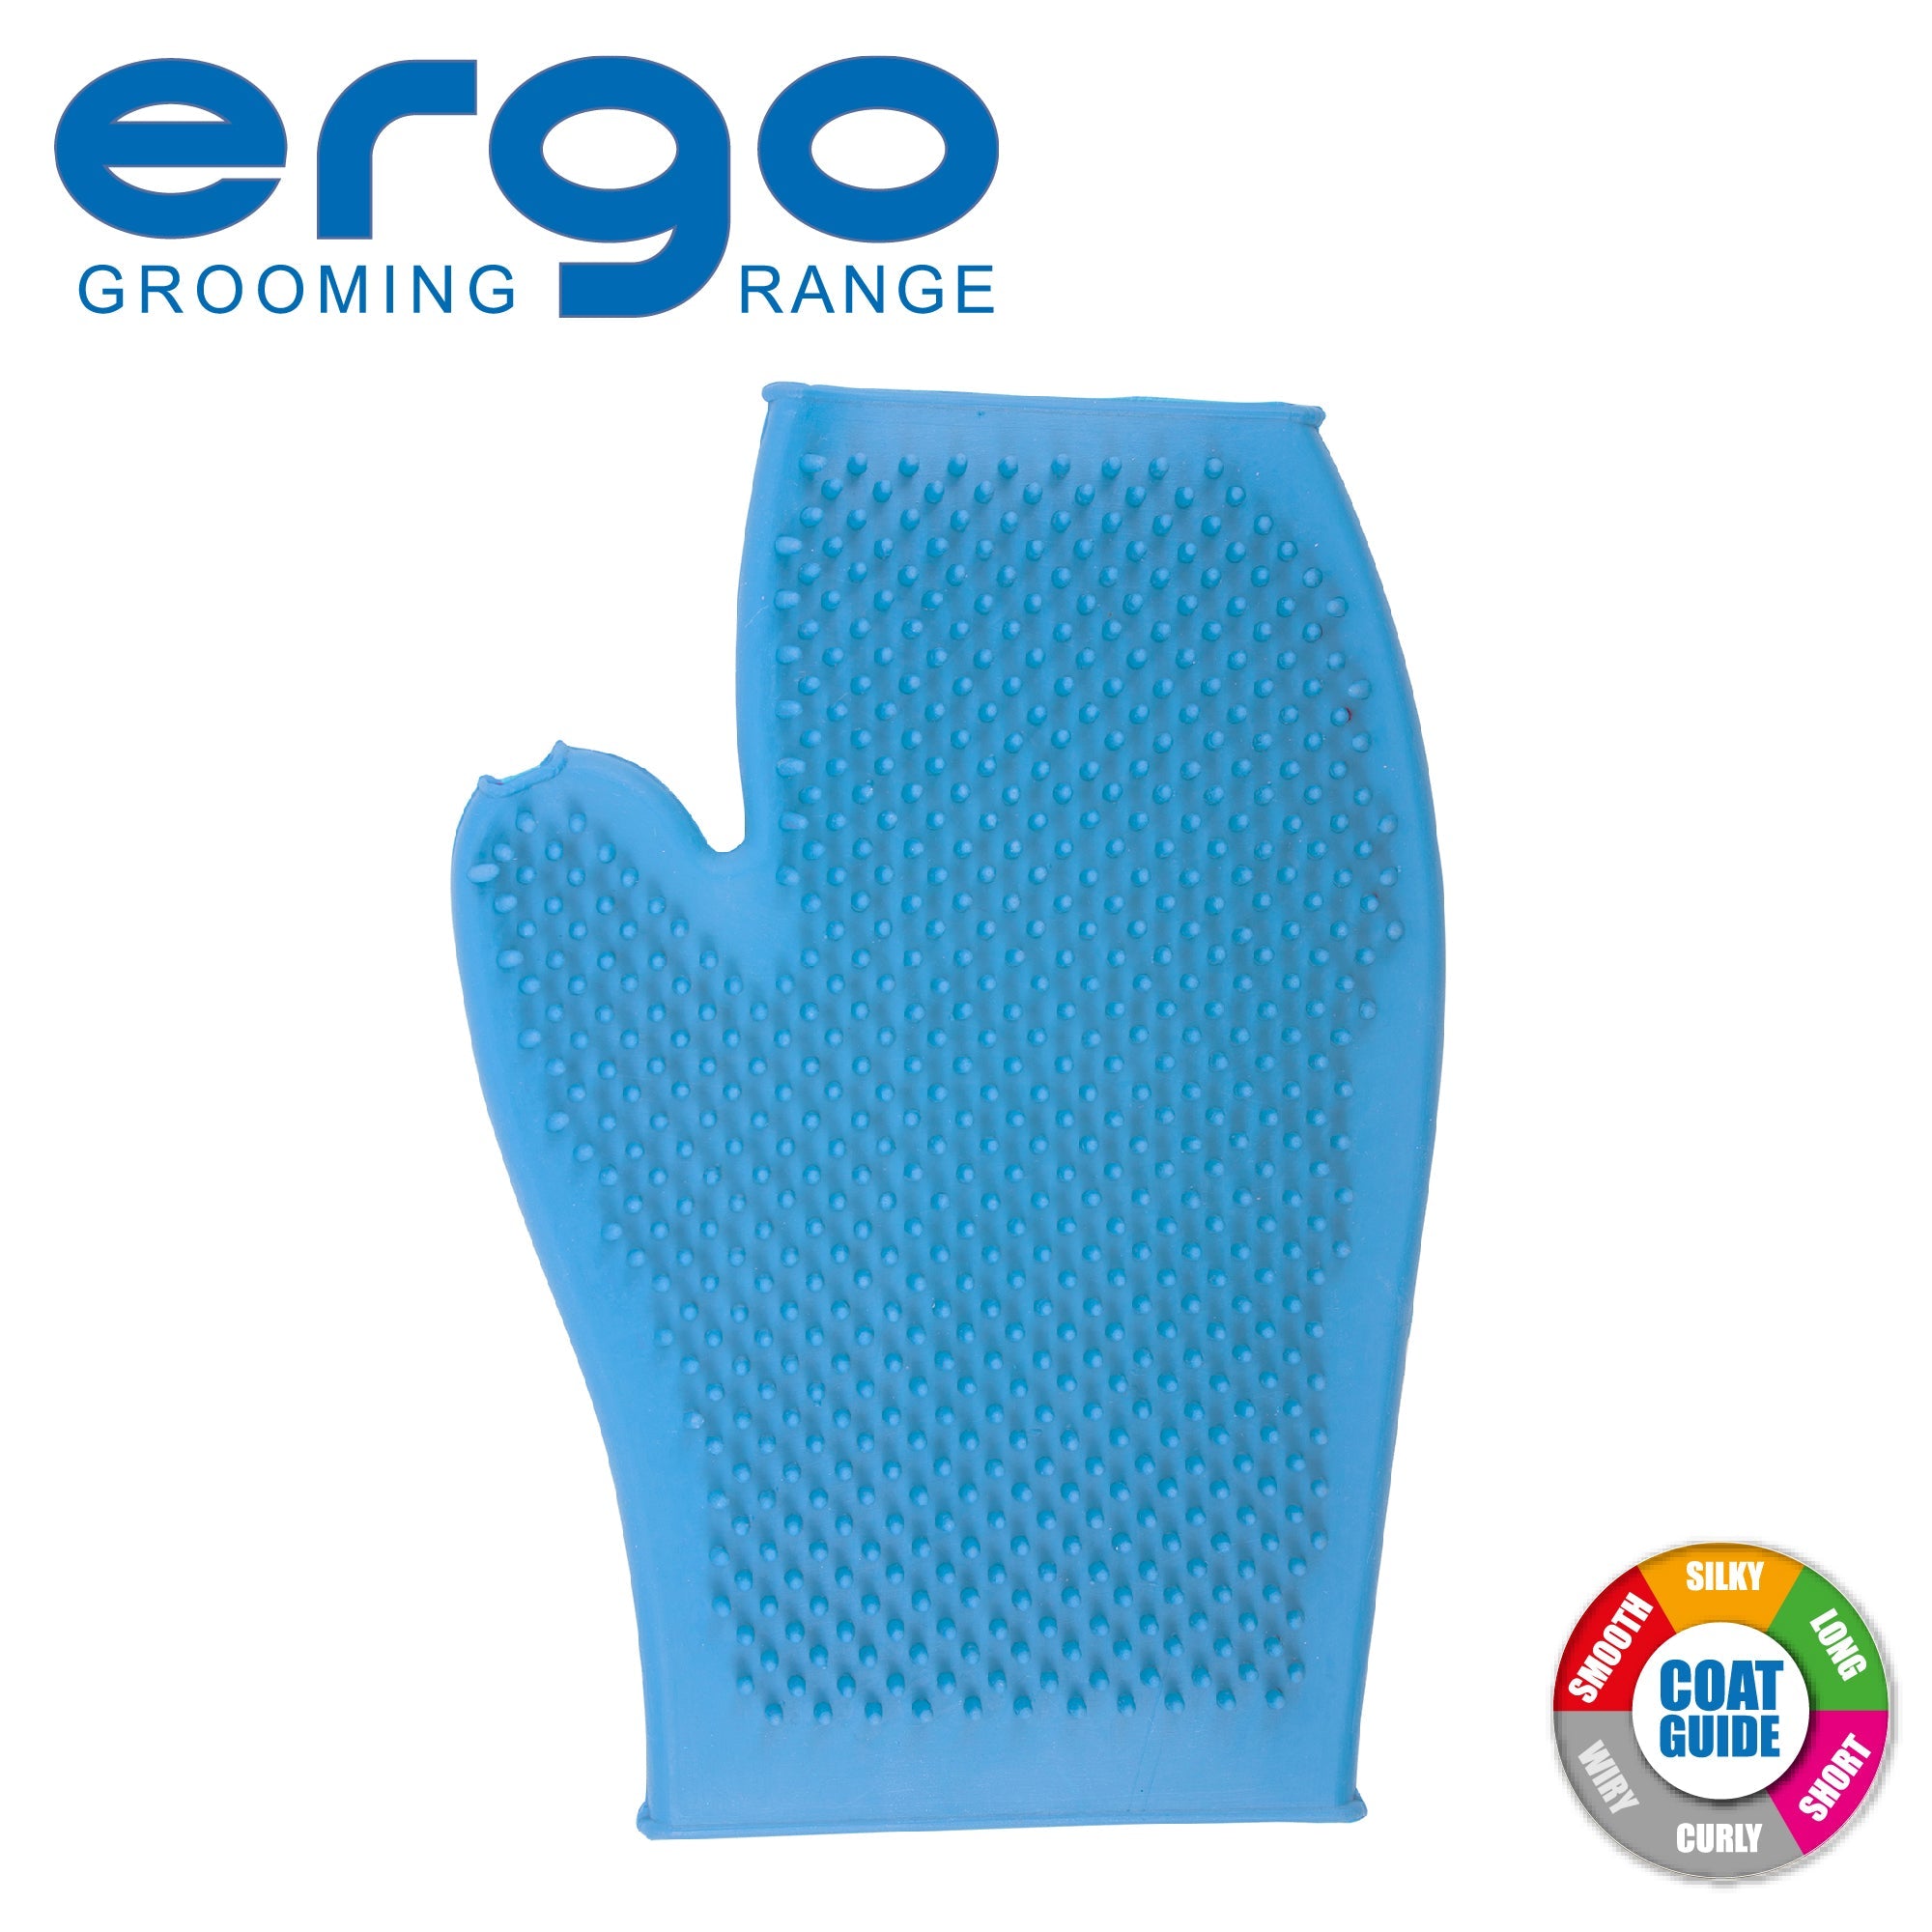 Ancol Ergo Rubber Grooming Glove Blue x 3, Ancol,